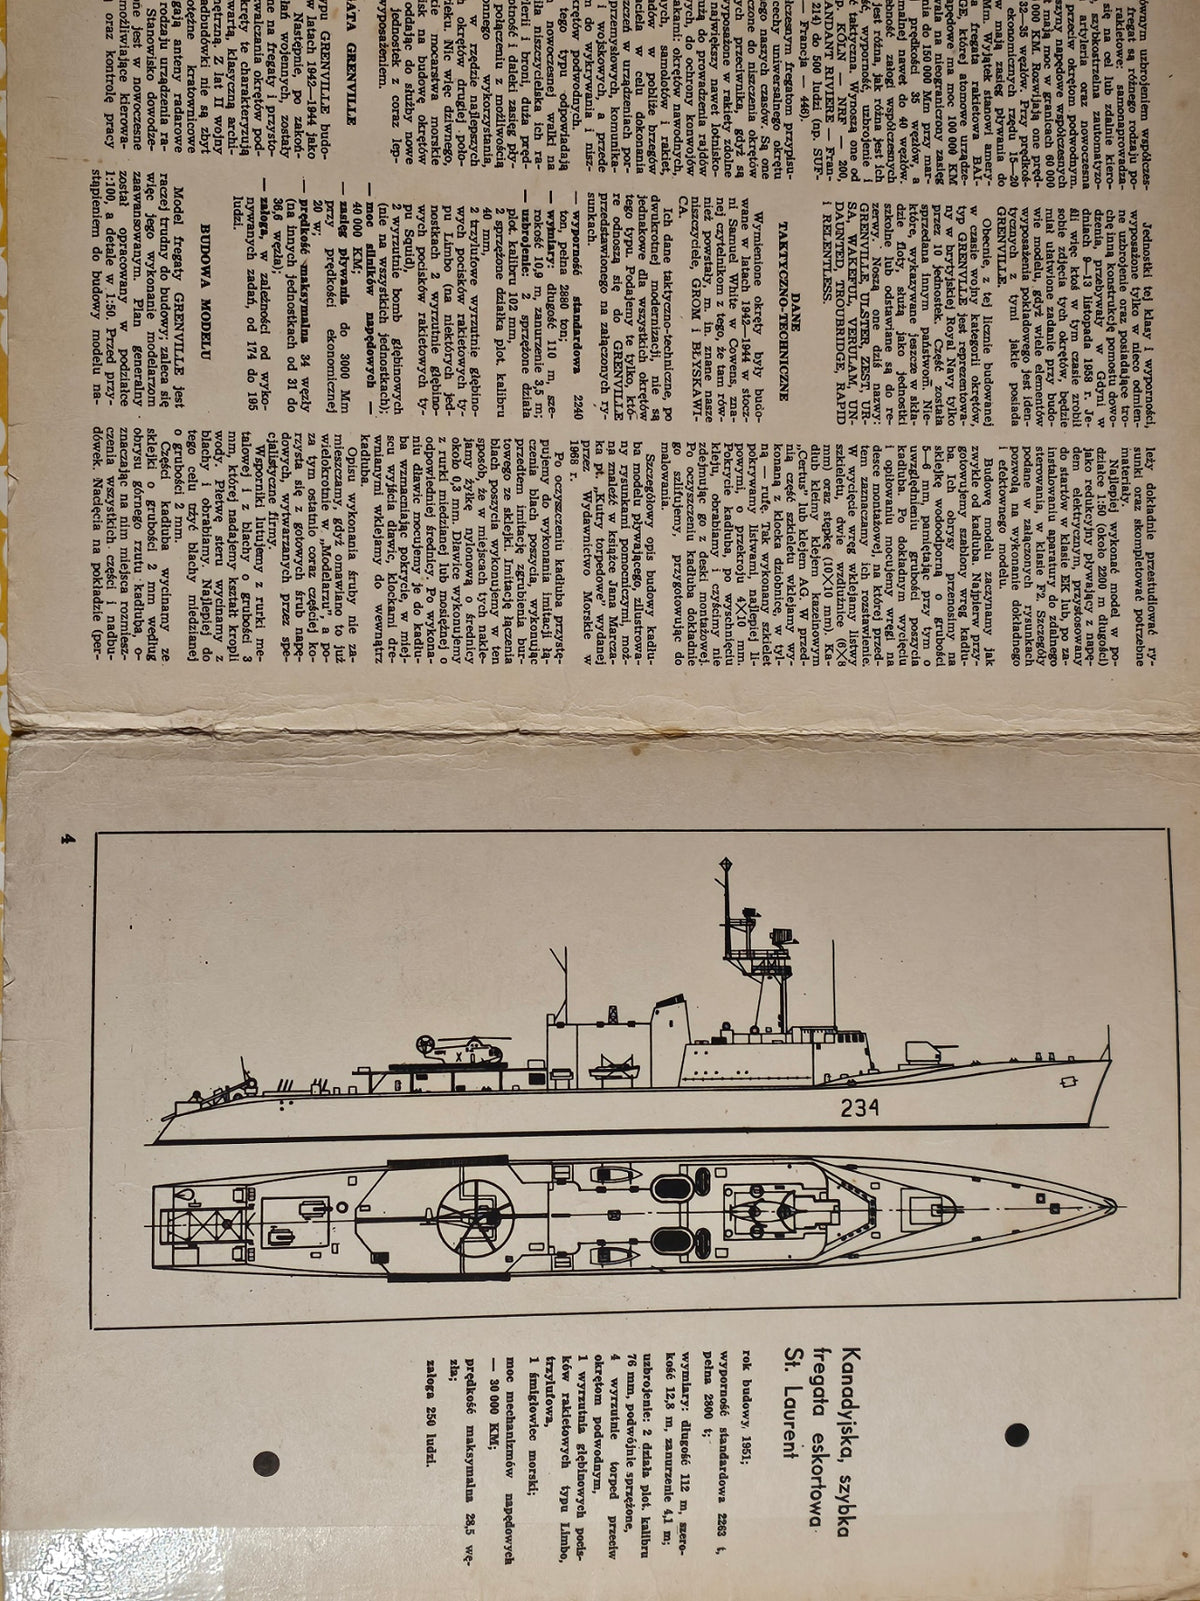 Vintage 1971 construction plans for the British Frigate Grenville by LOK Publishing, showing detailed blueprints with noticeable paper discolorations.